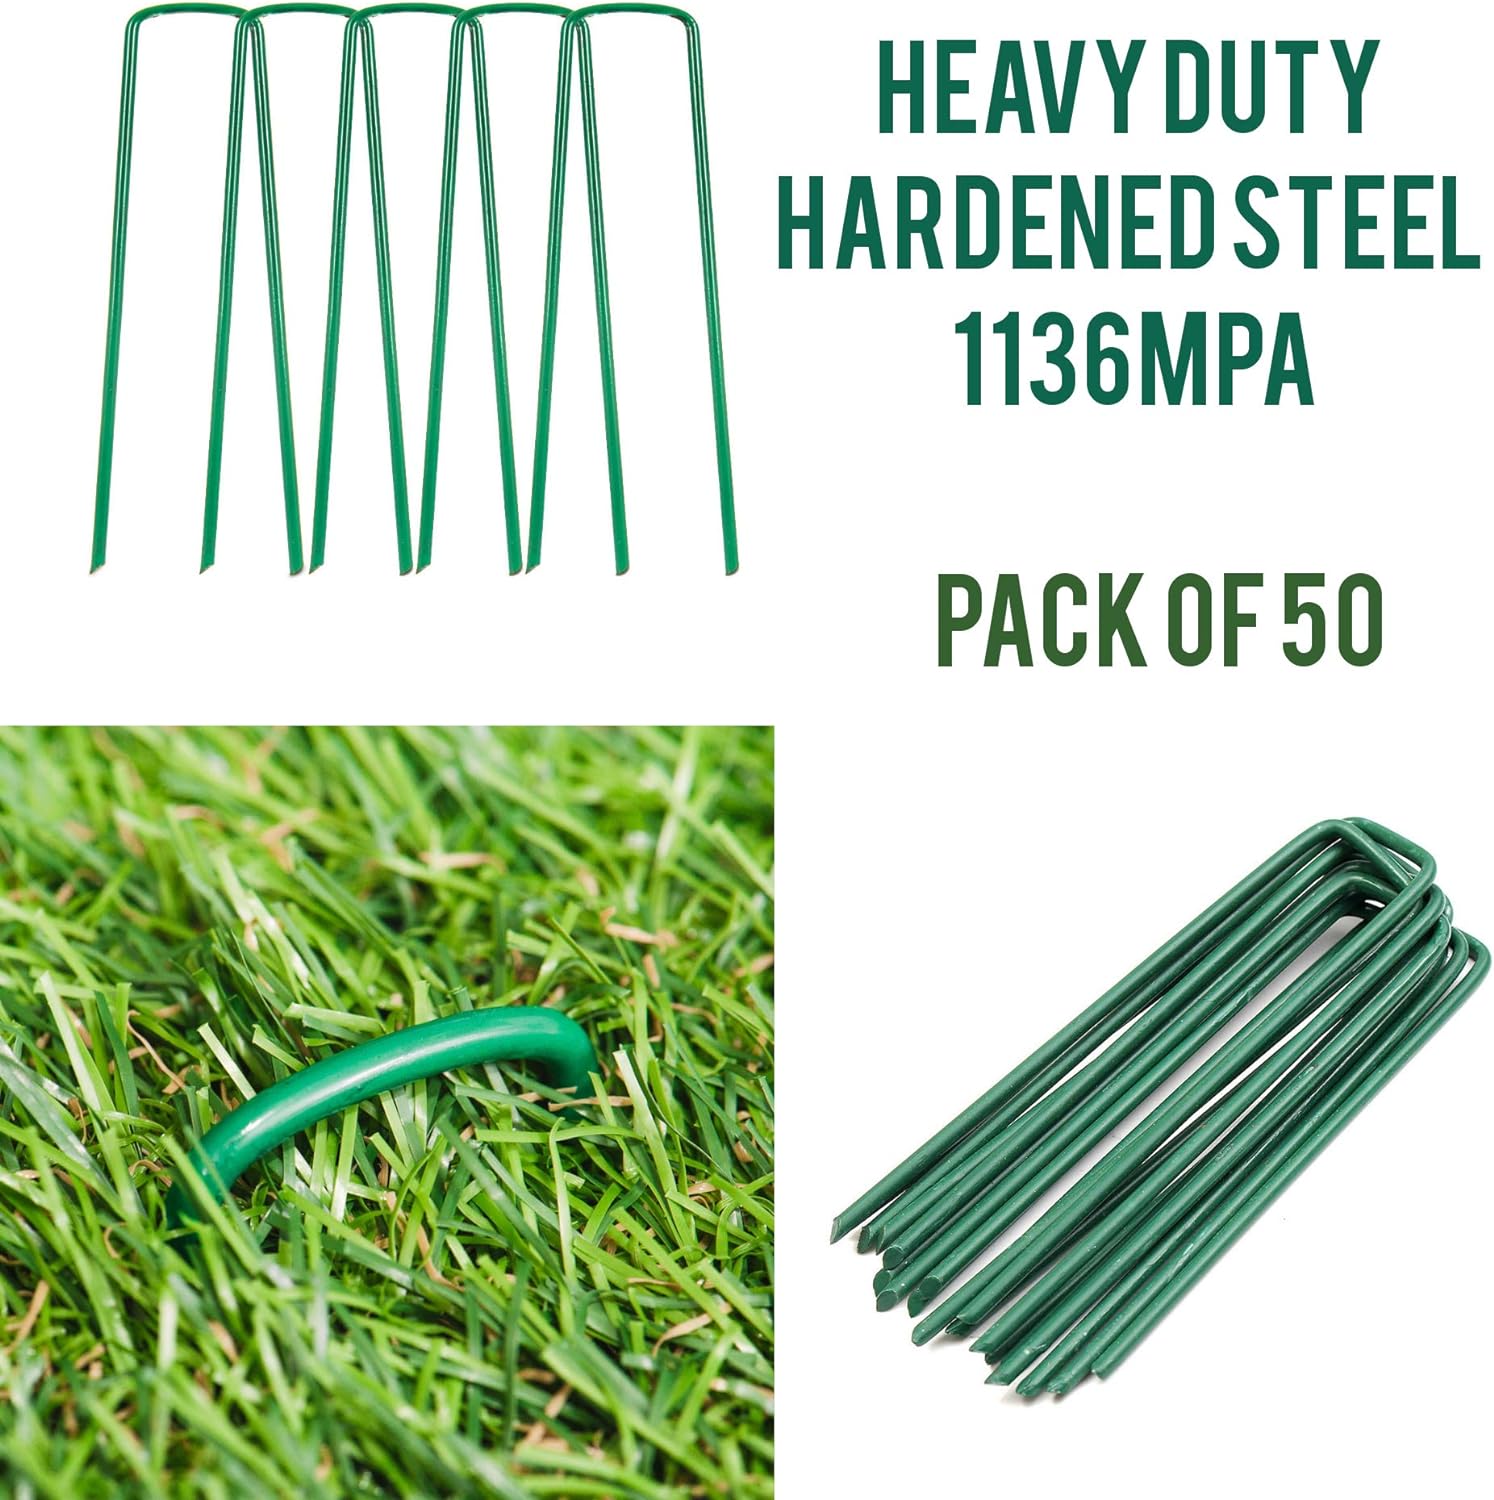 ADEPTNA Heavy Duty Green U-Shaped Garden Pins Securing Galvanised Metal Pegs For Artificial Grass Weed Fabric Landscape Netting Ground Sheets Fleece 15cm Powder Coated (PACK OF 50)